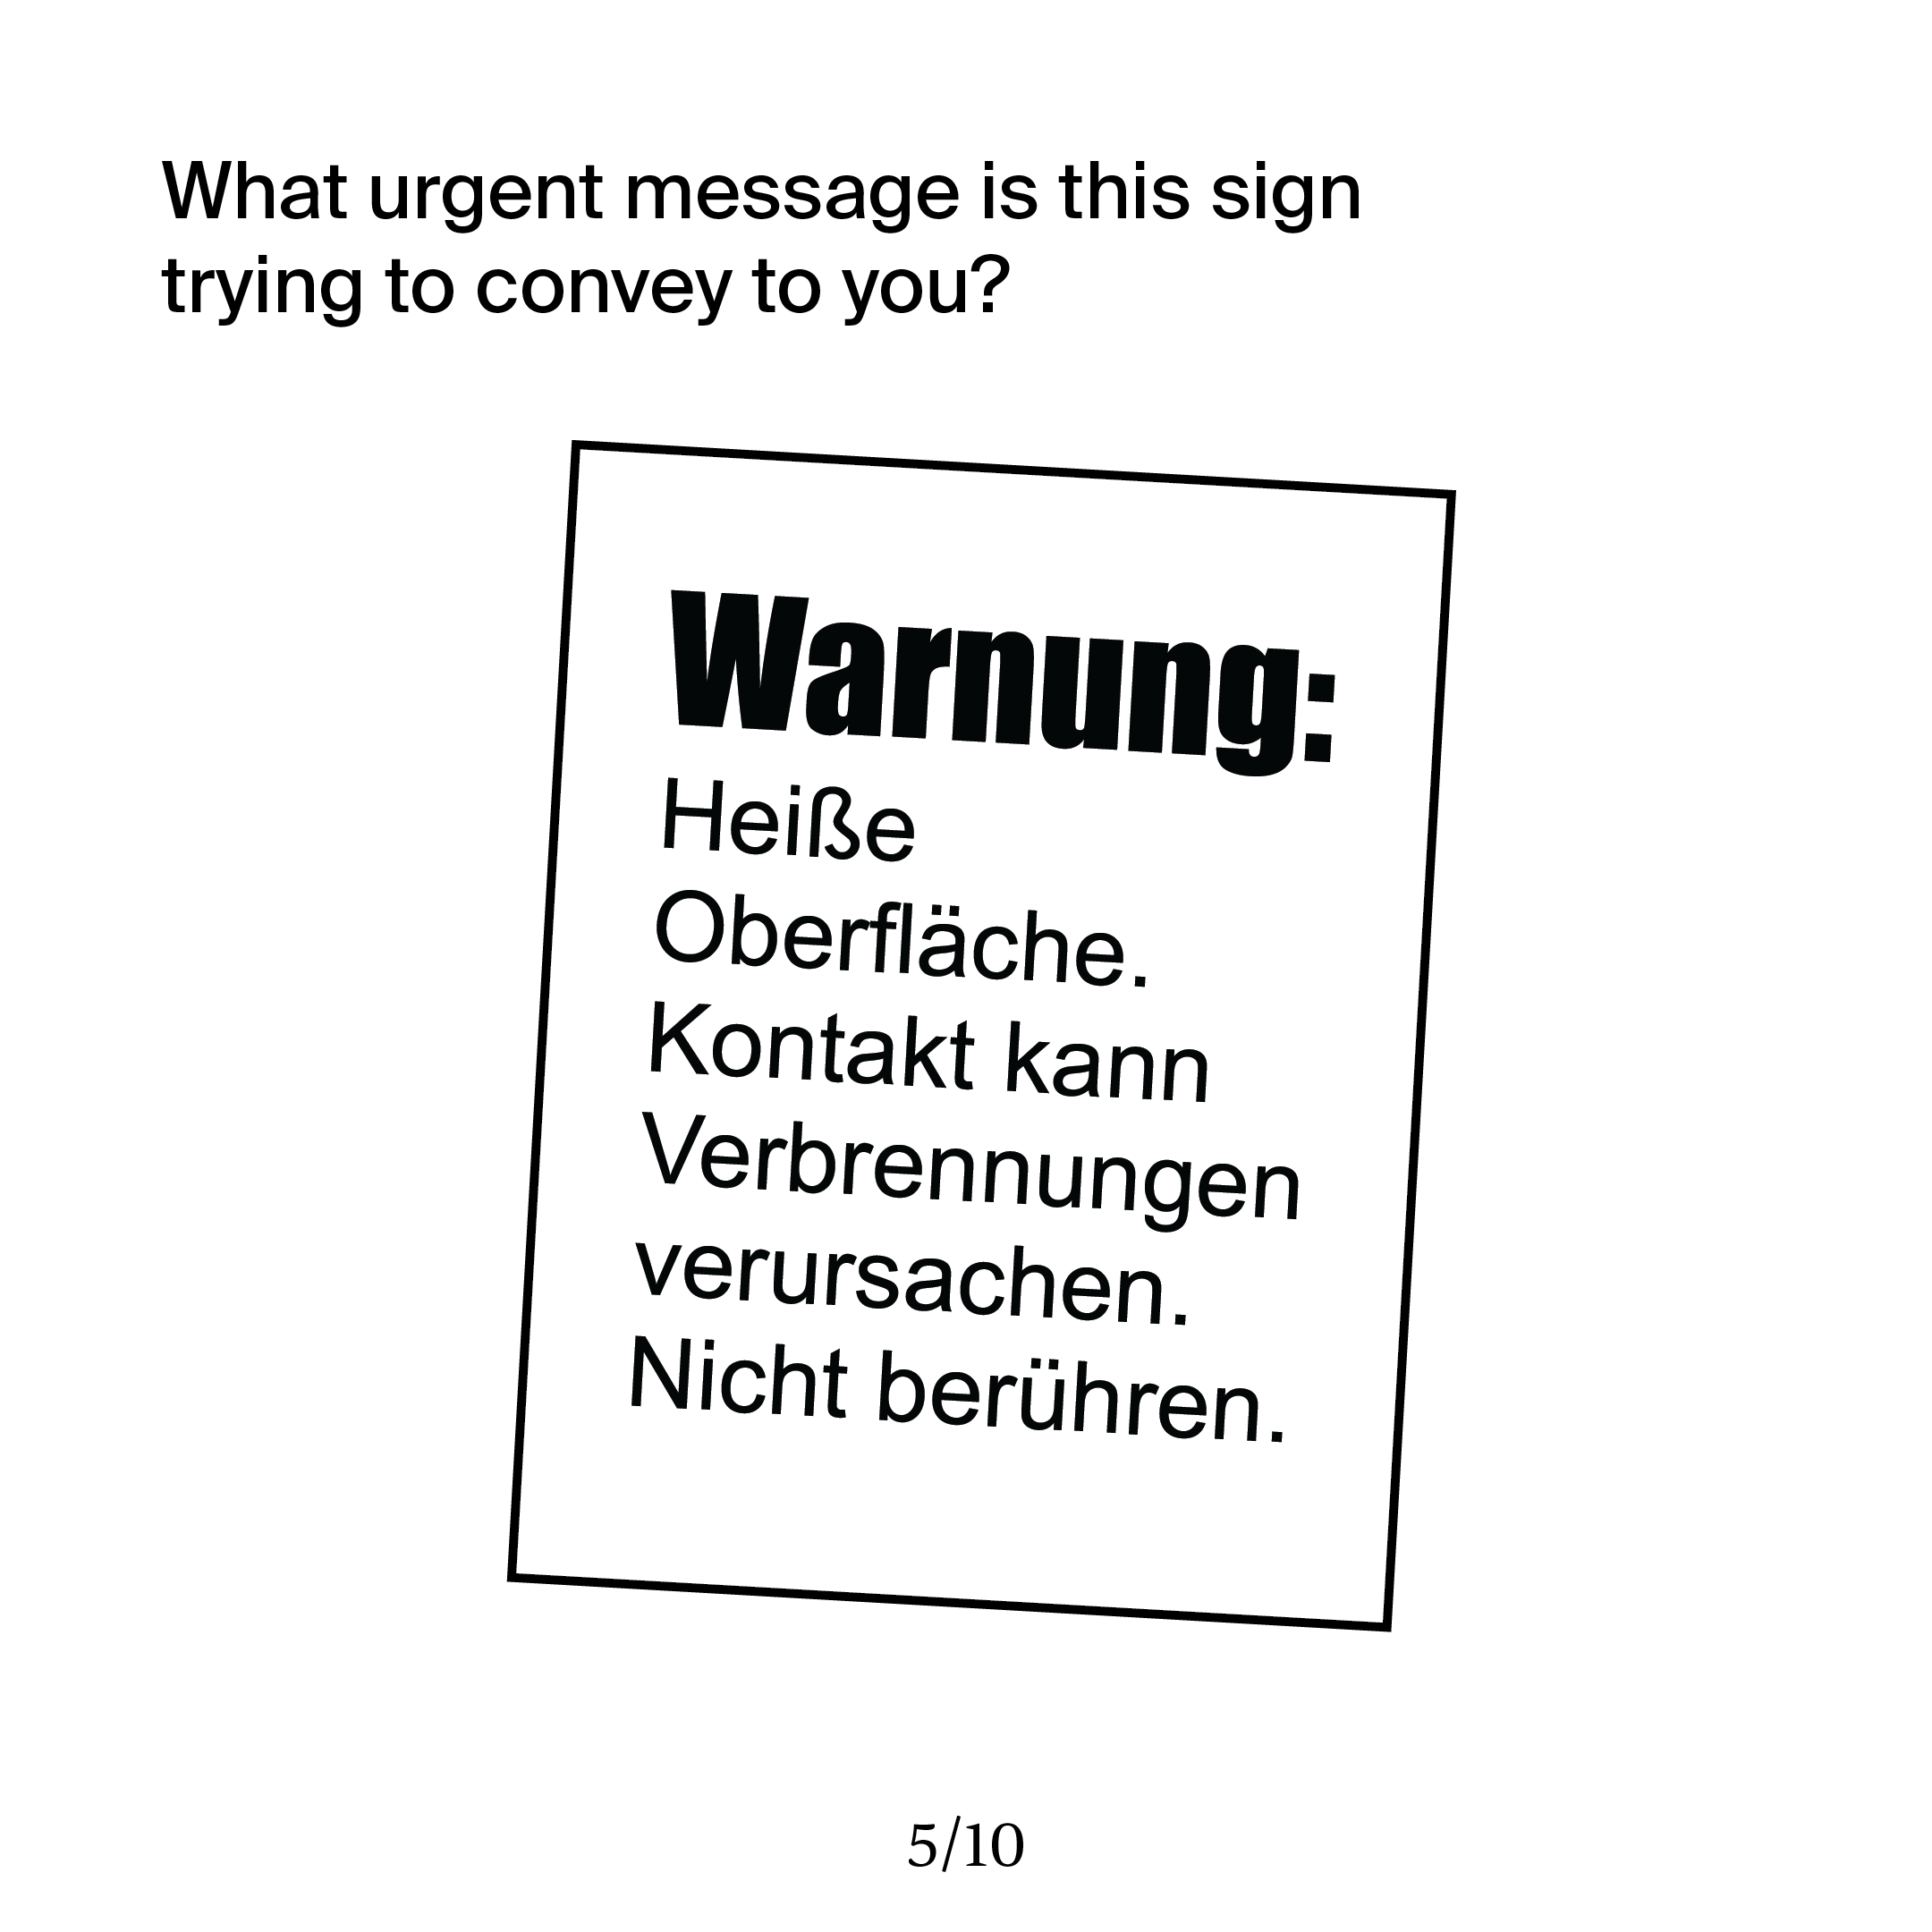 This slide shows a print-out of a warning sign, but the sign is in German. I ask my (typically American) audience 'What urgent message is this sign trying to convey to you?'